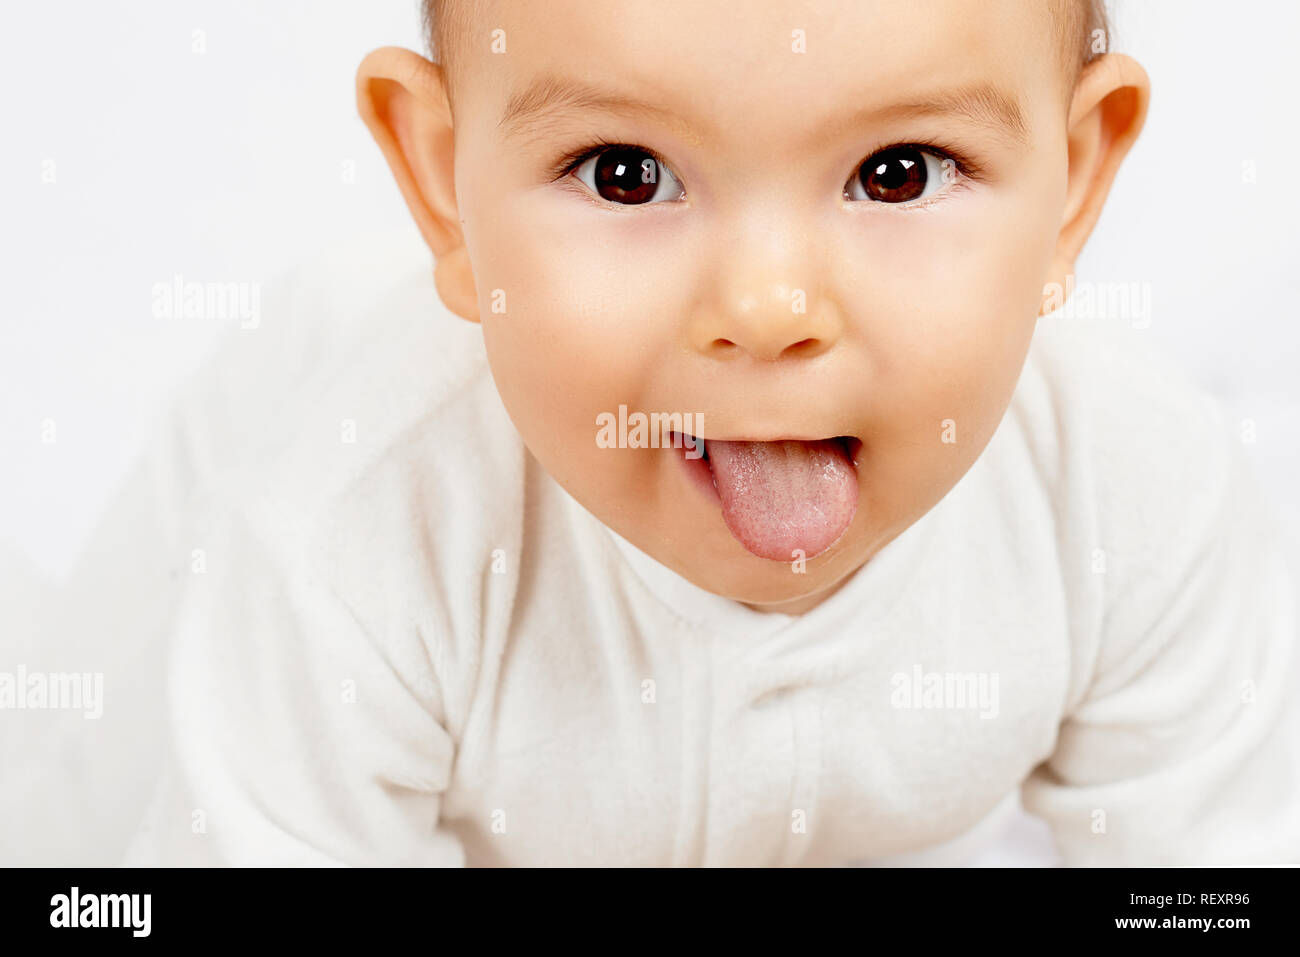 White coating on tongue baby. Oral thrush. funny toddler expression Stock Photo